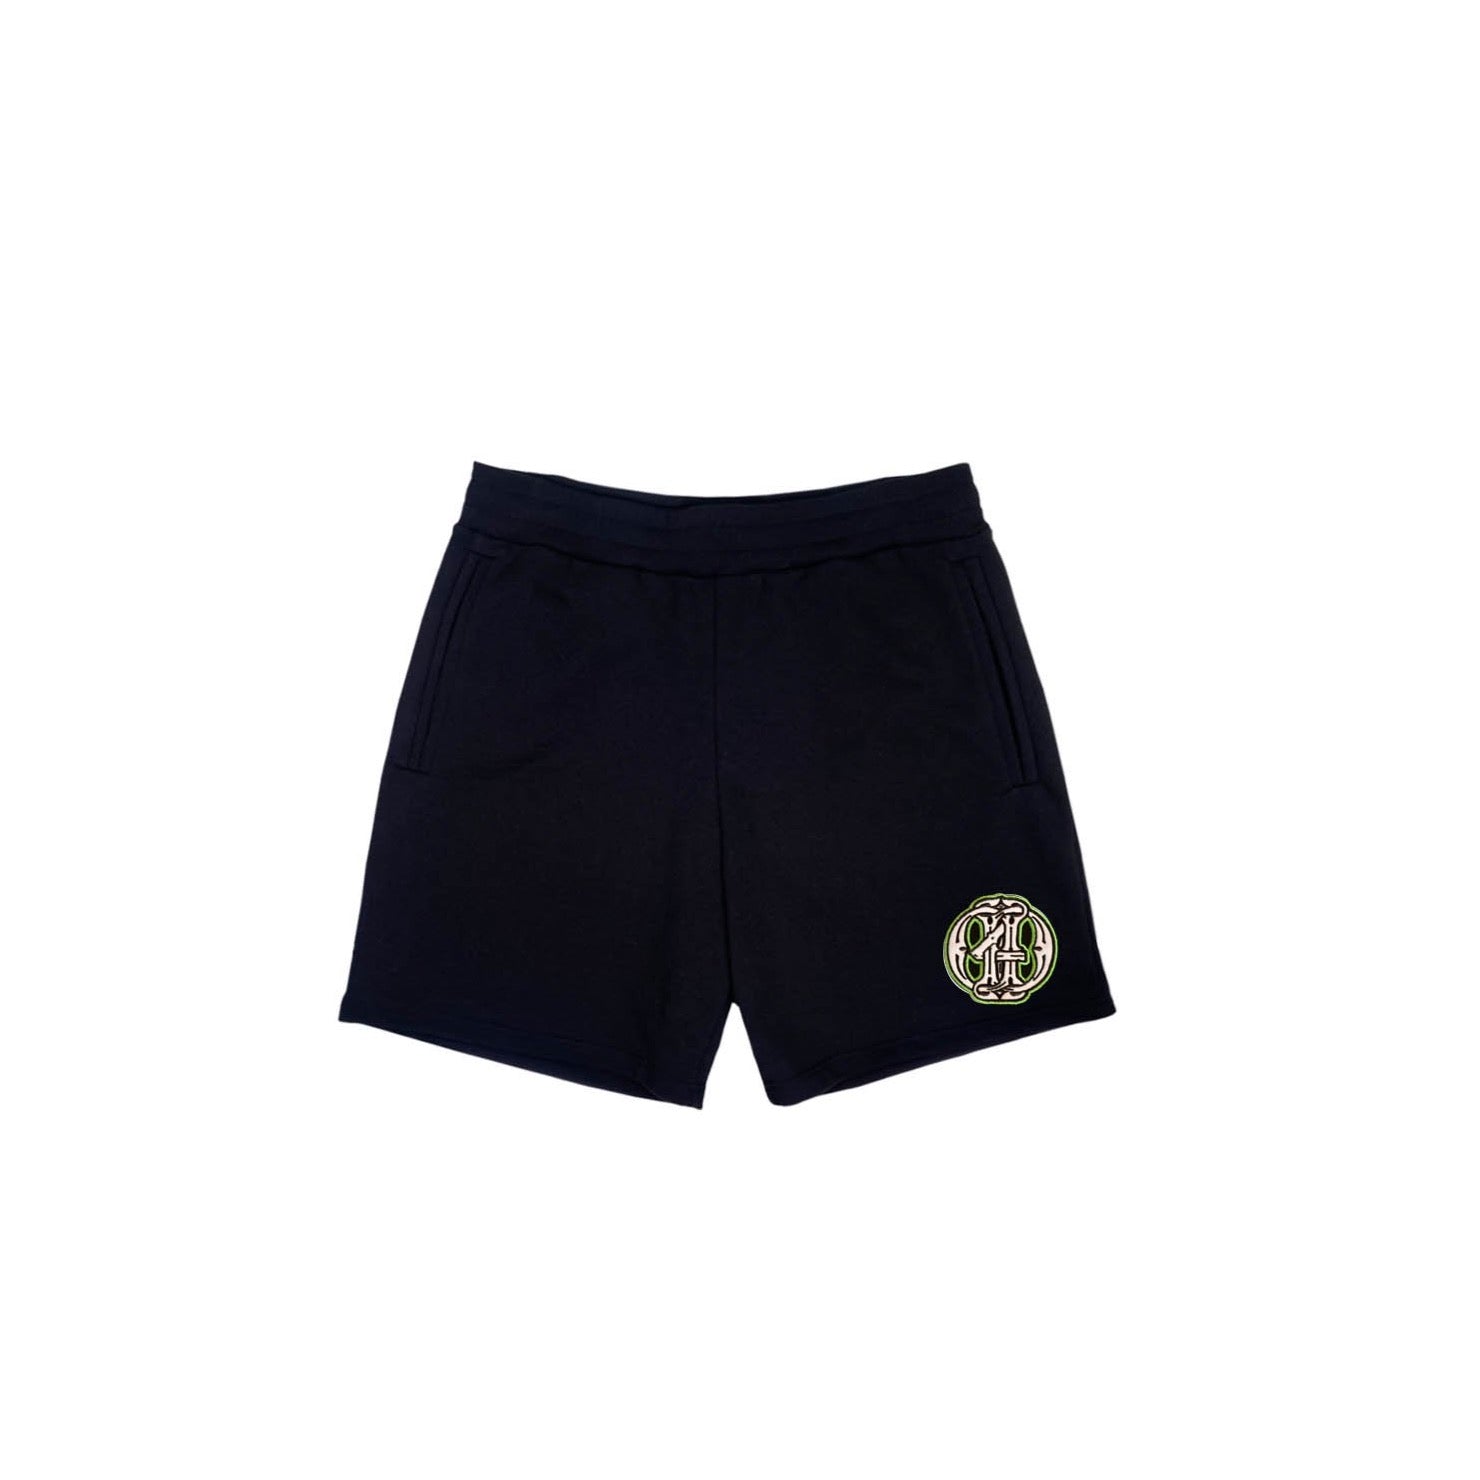 Monogram French Terry Lux Cream Shorts – Death4Dollars